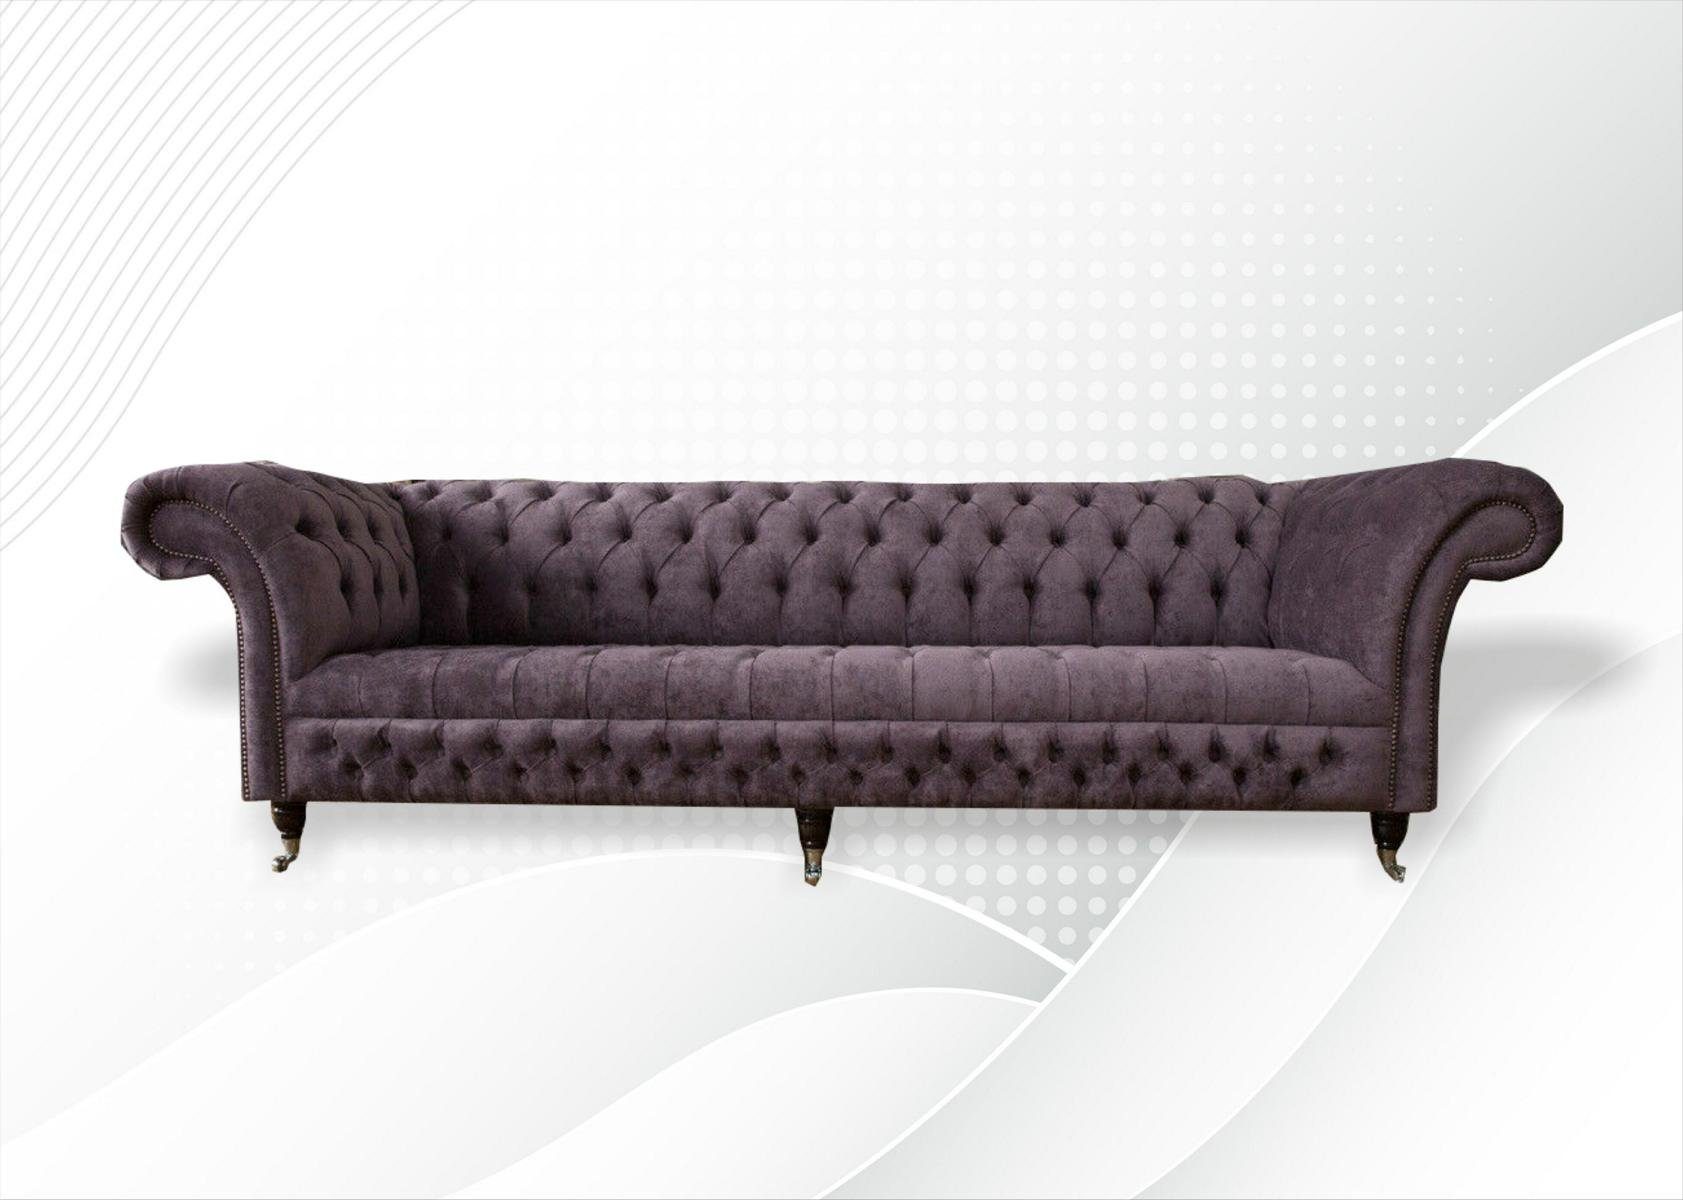 JVmoebel Sofa xxl Big Europe 265cm Sitzer Couch Leder, Polster Sofa in Made Chesterfield Sofas 4